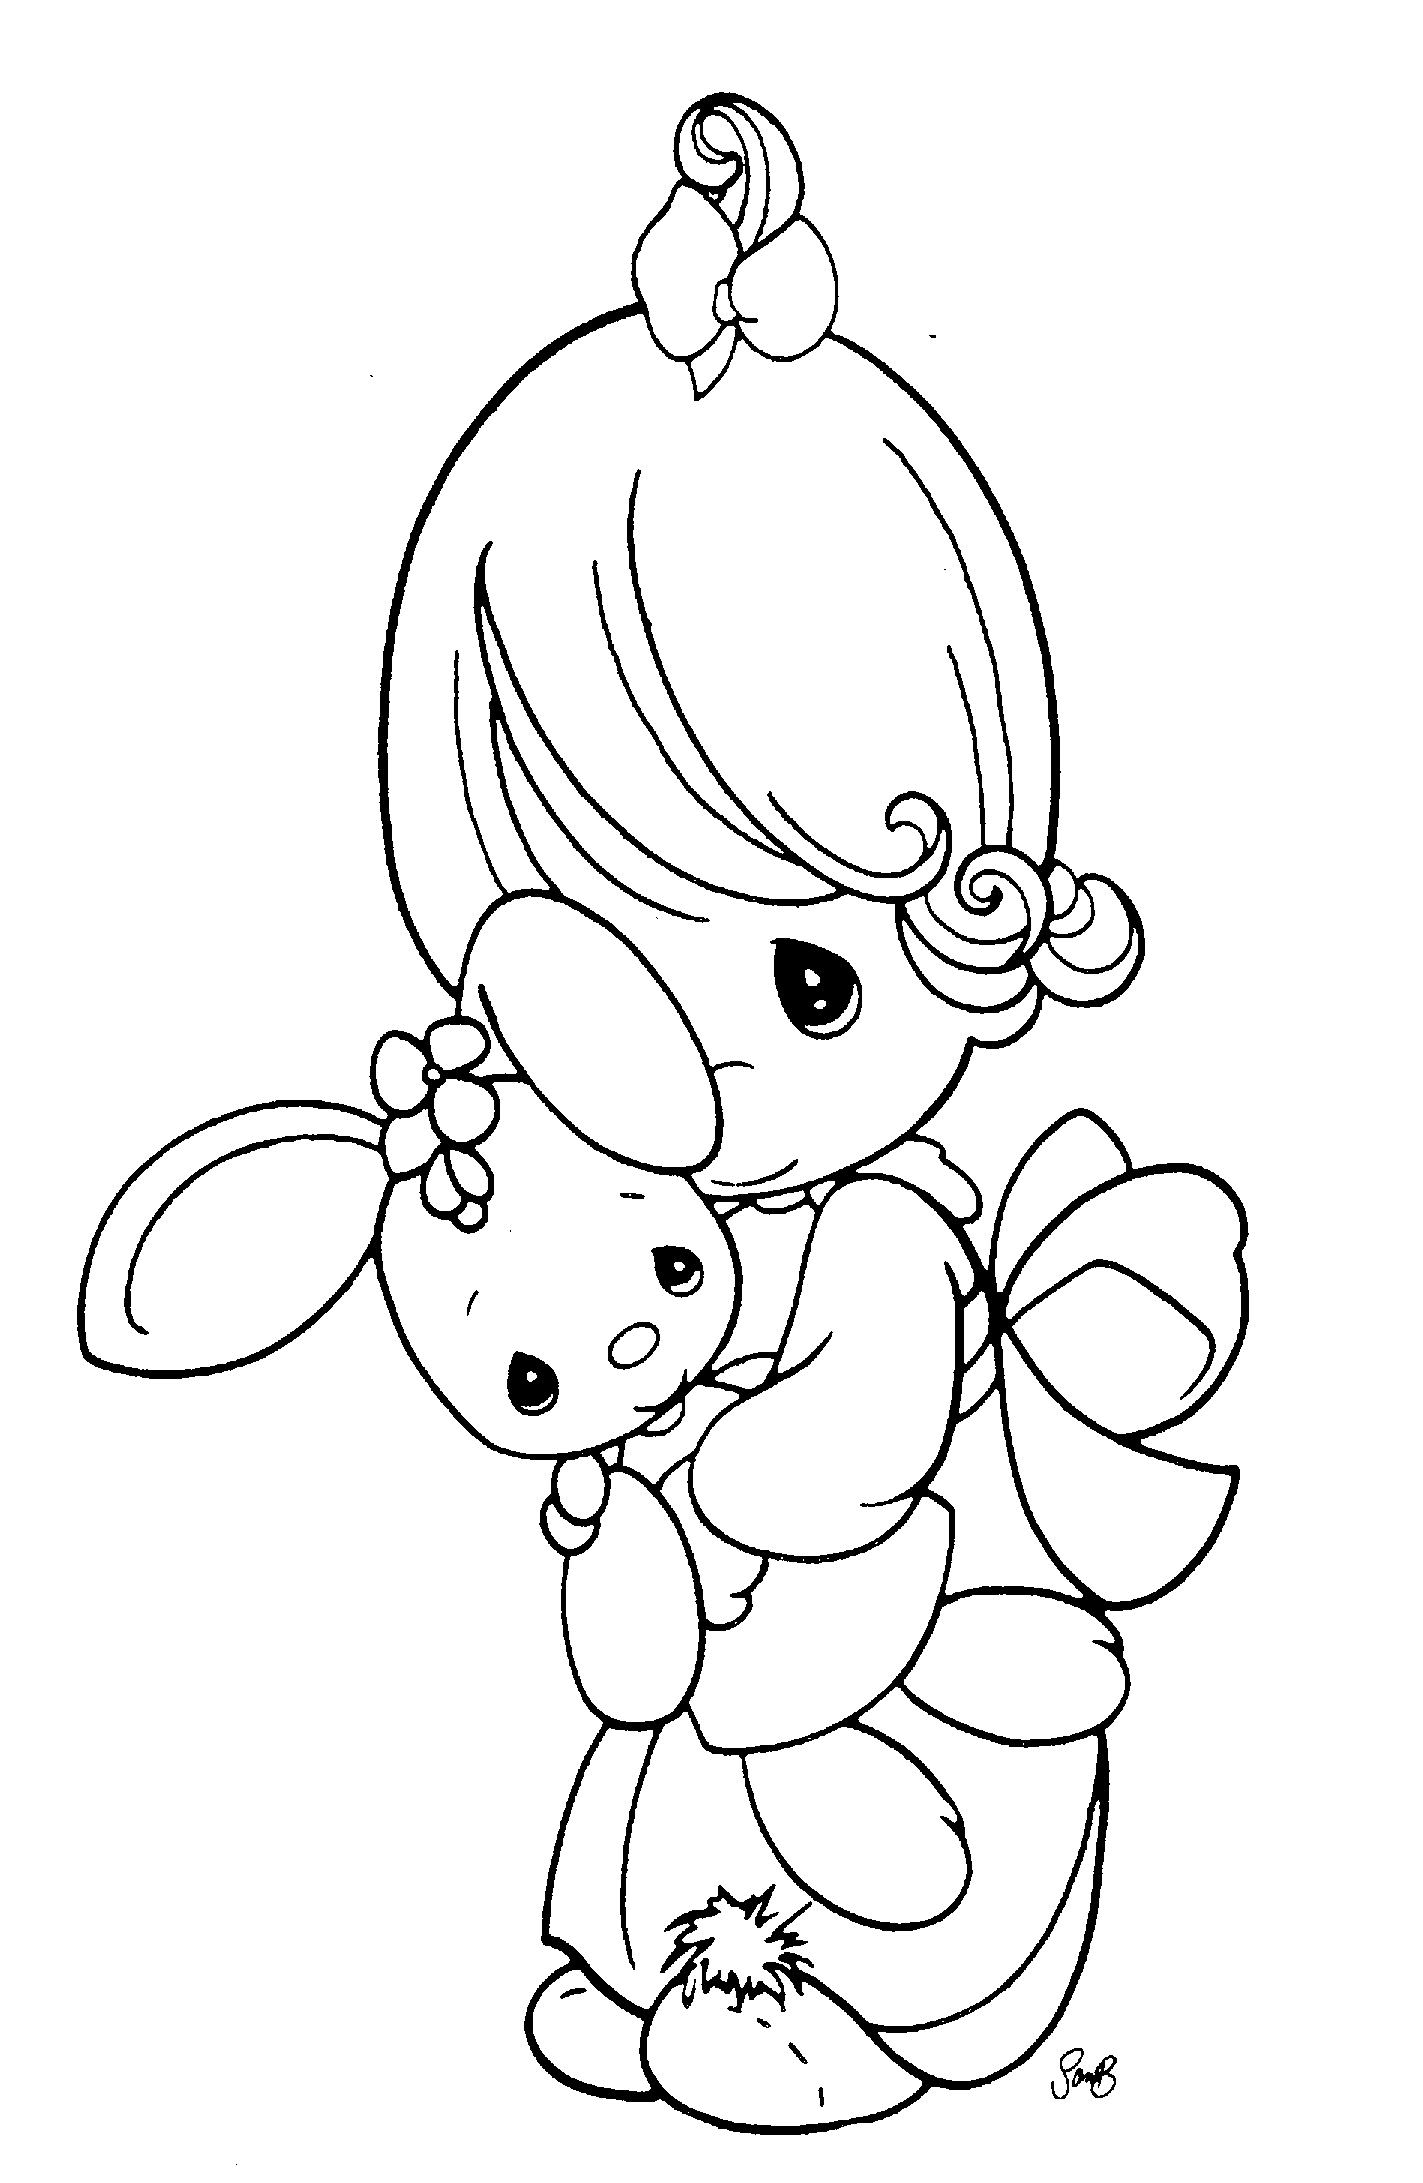 Free Printable Precious Moments Coloring Pages For Kids HD Wallpapers Download Free Images Wallpaper [wallpaper896.blogspot.com]